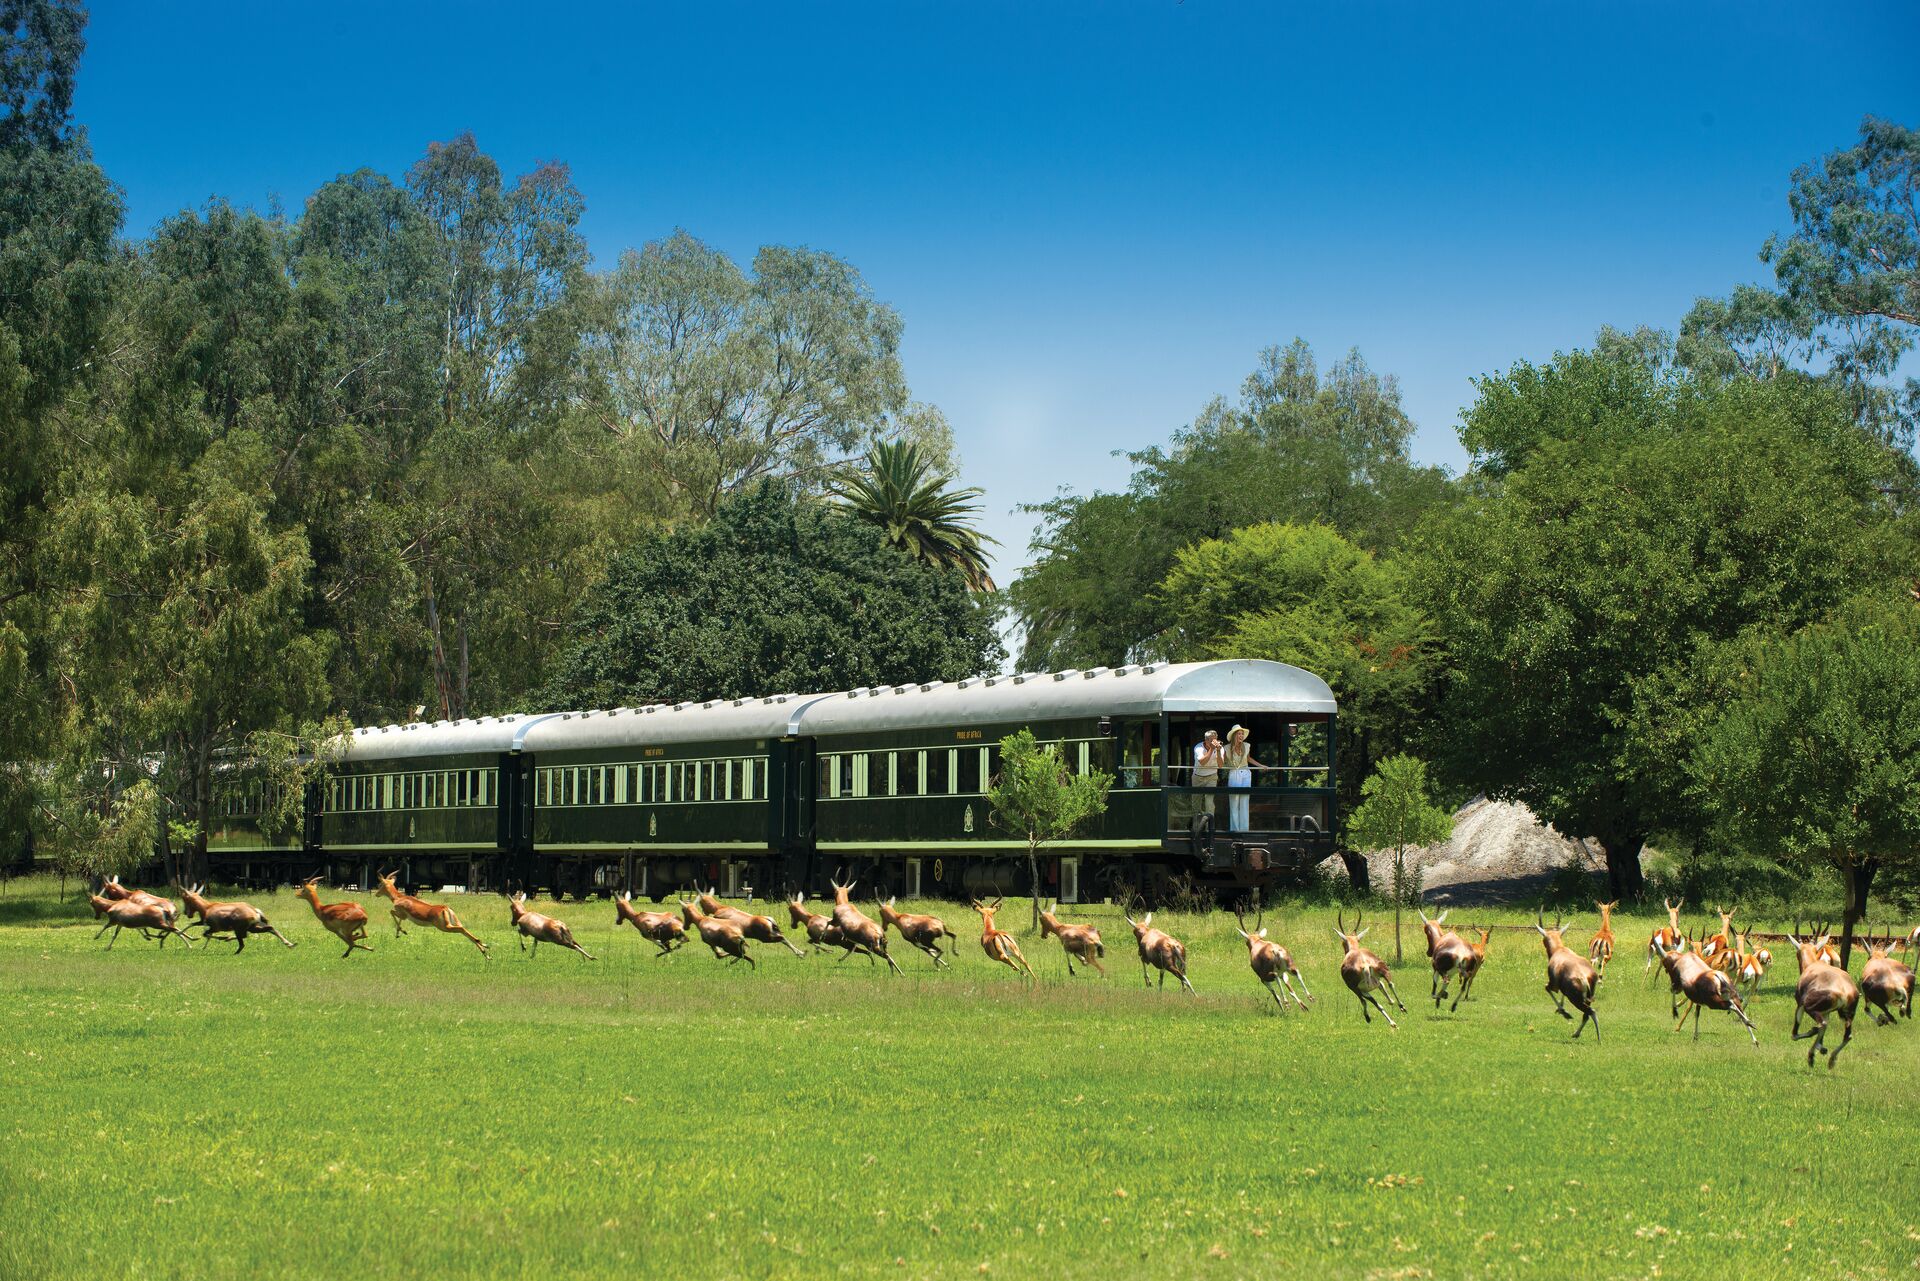 Rovos Rail train passing a herd of antelope 